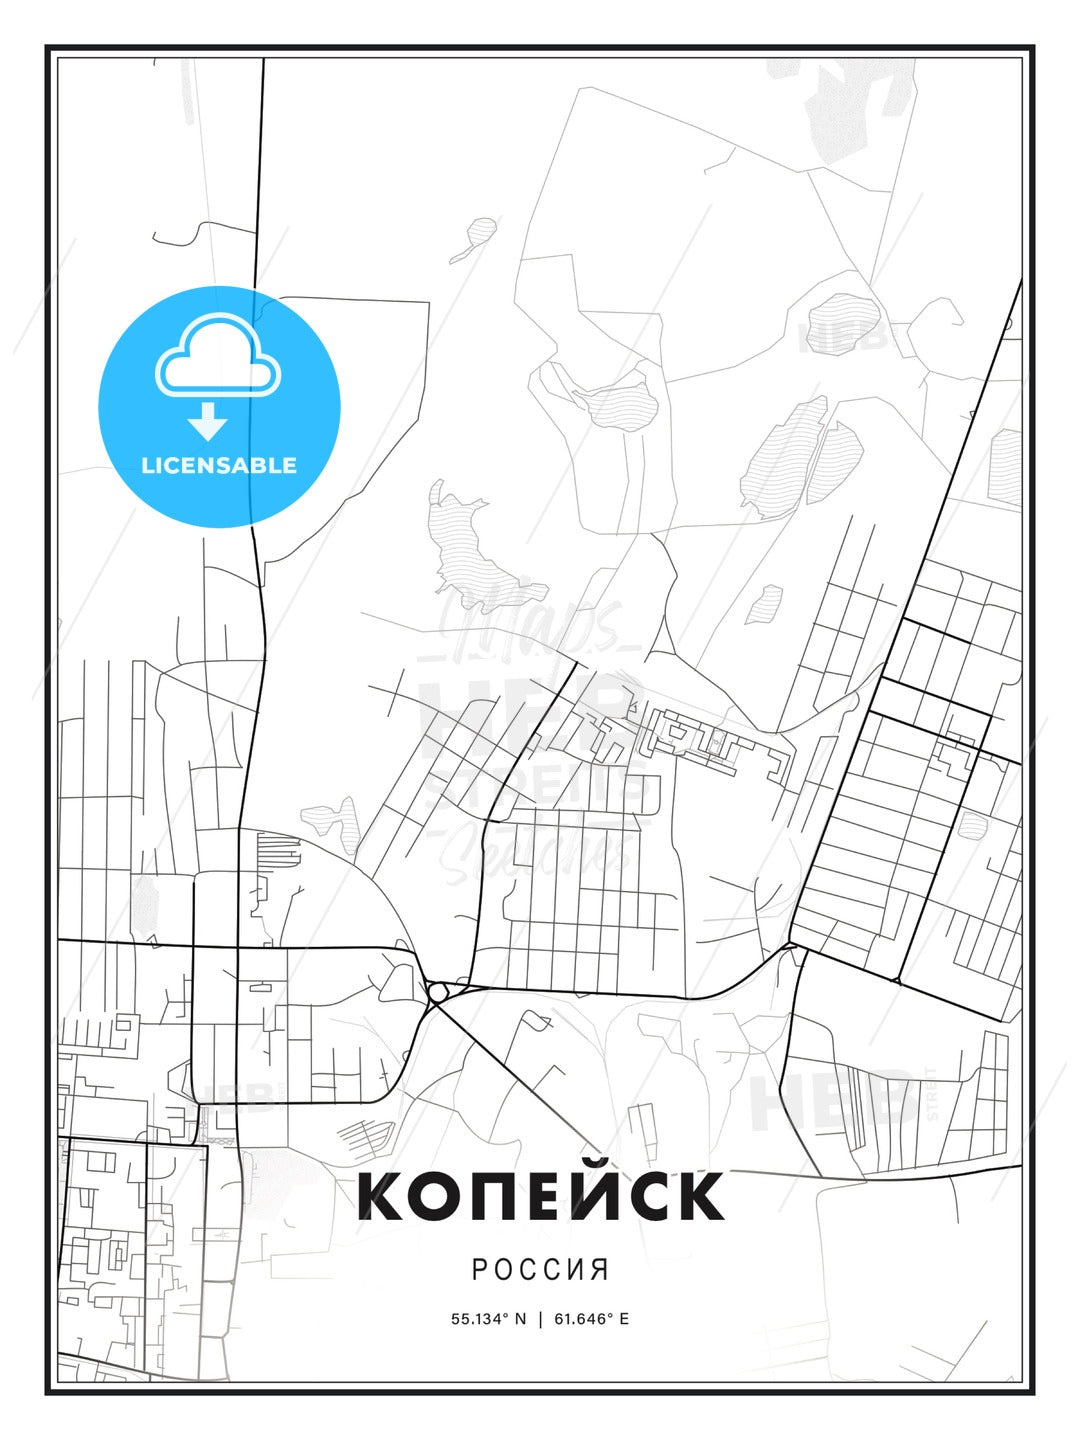 КОПЕЙСК / Kopeysk, Russia, Modern Print Template in Various Formats - HEBSTREITS Sketches